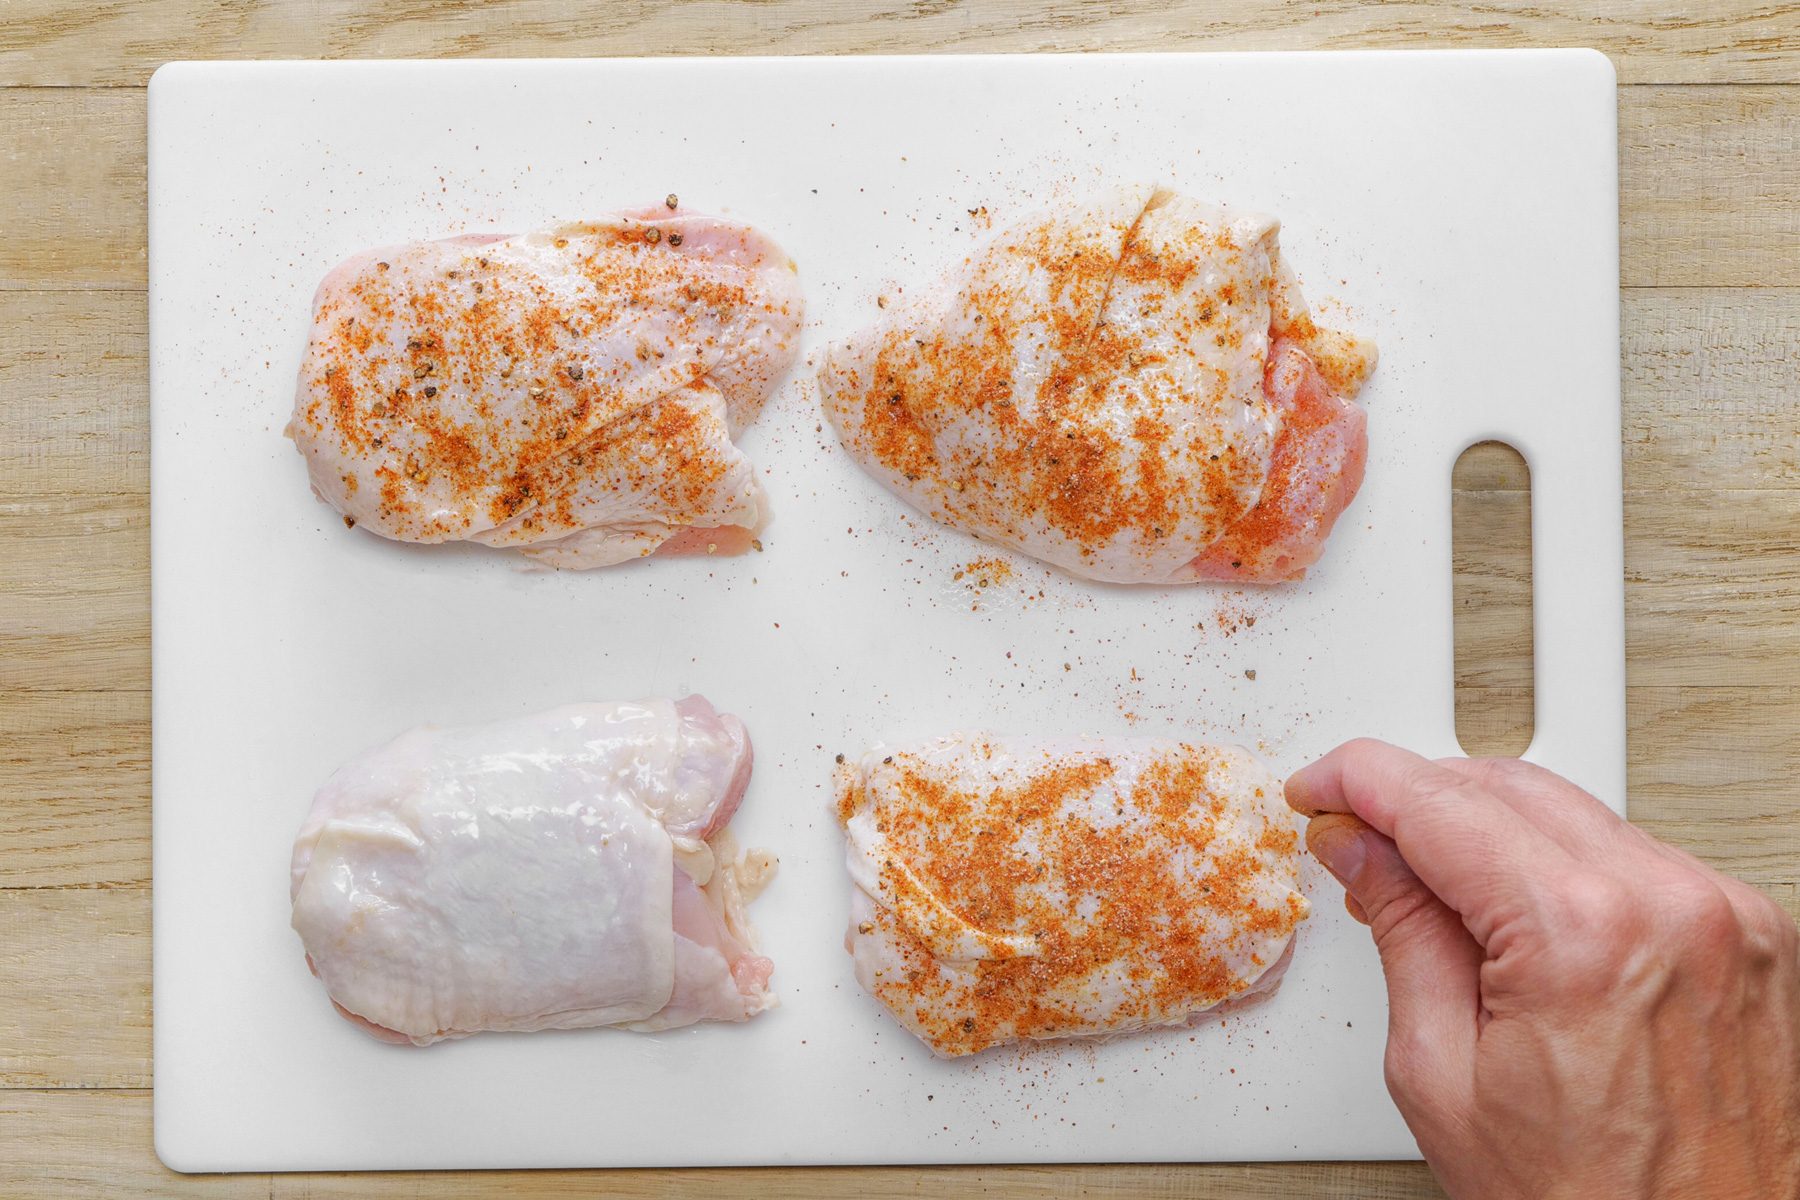 Four chicken breasts with seasoning on a cutting board